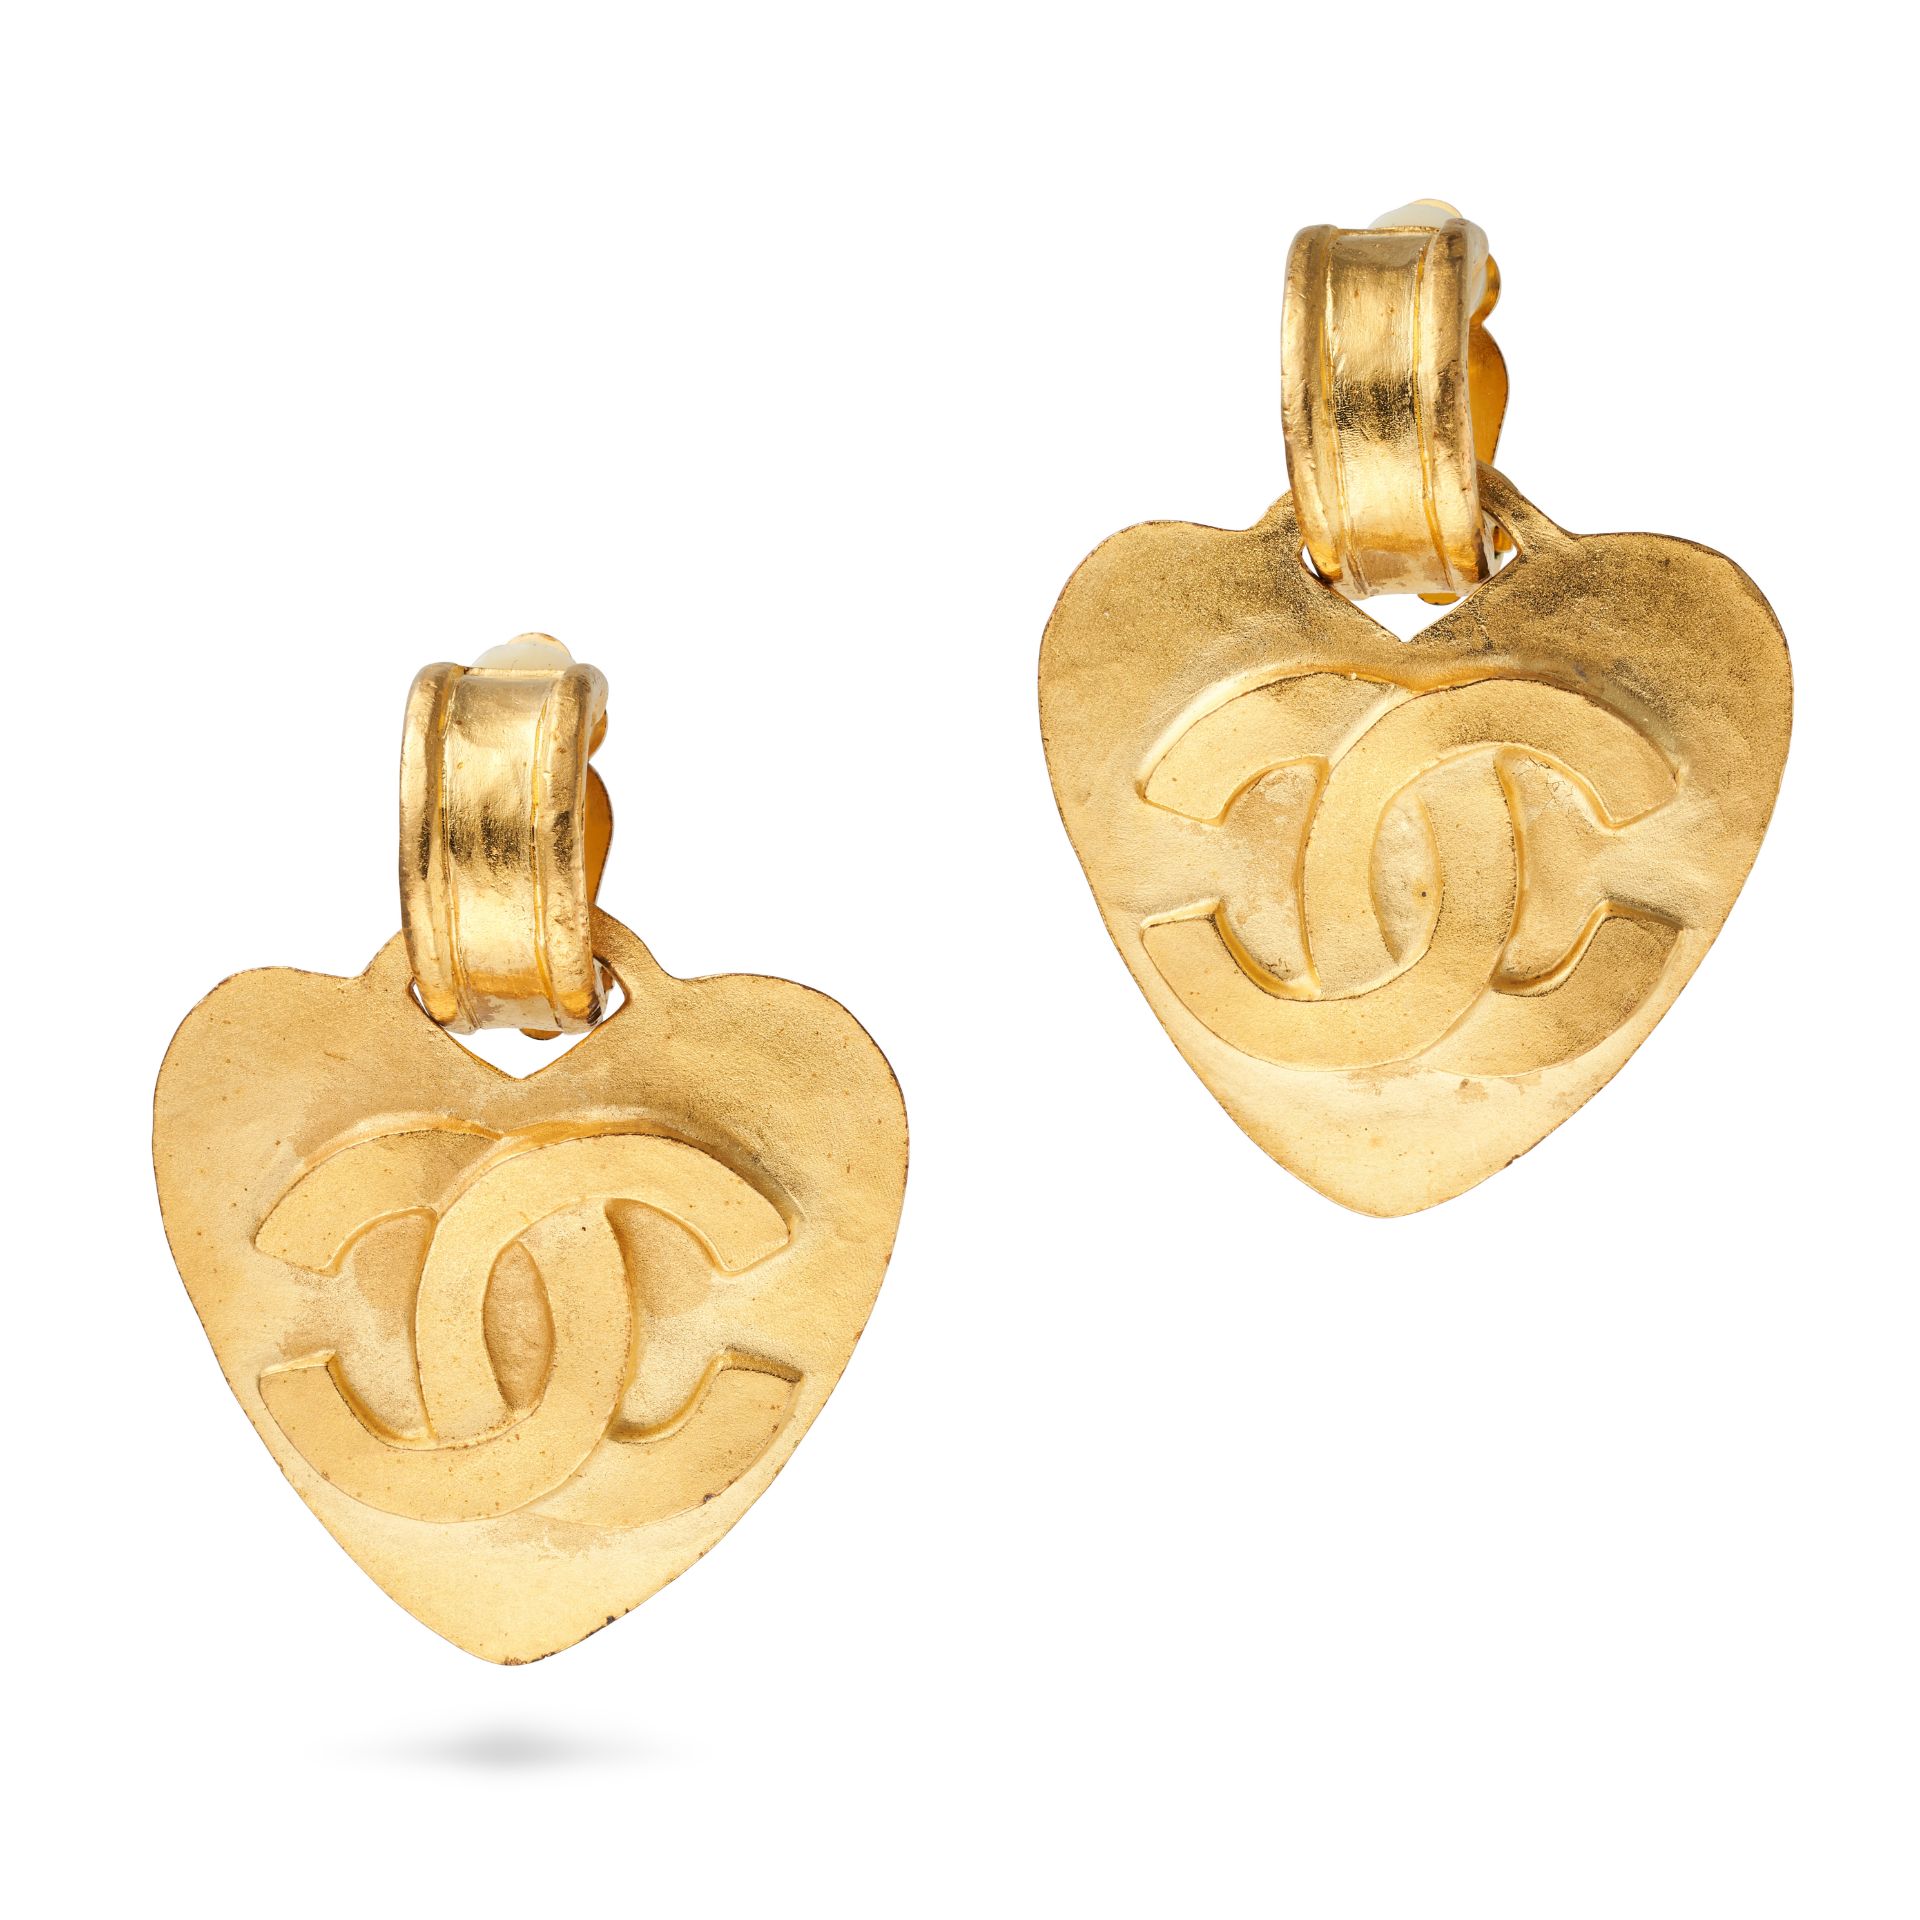 CHANEL, A PAIR OF VINTAGE CLIP EARRINGS each comprising a heart shape charm with interlocking CC ...